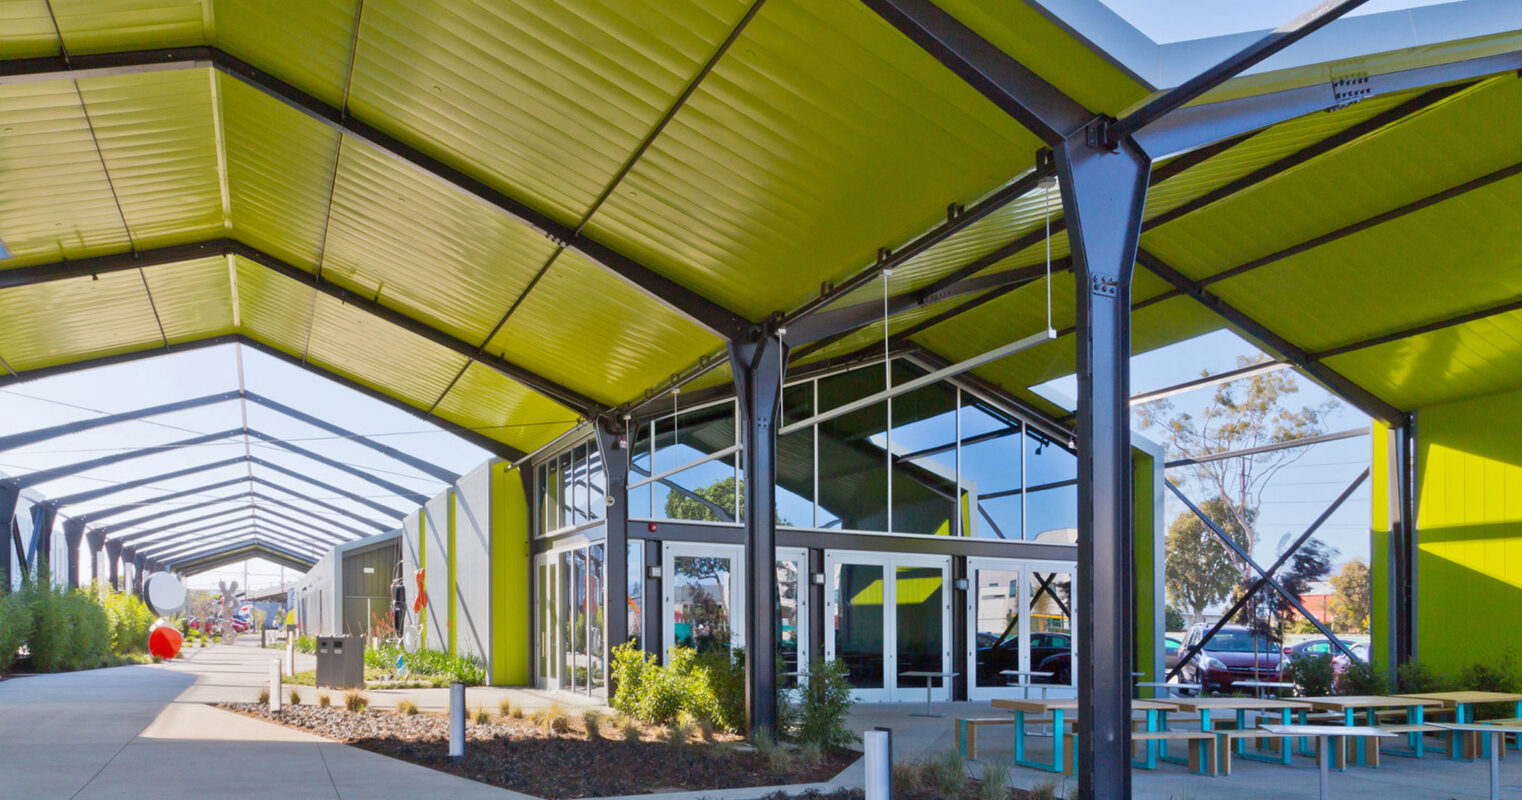 Bright, open-air walkway featuring a row of geometric, green canopies supported by steel columns, integrated into a modern commercial structure with large glass panels, reflecting a fusion of functional and eco-friendly design.